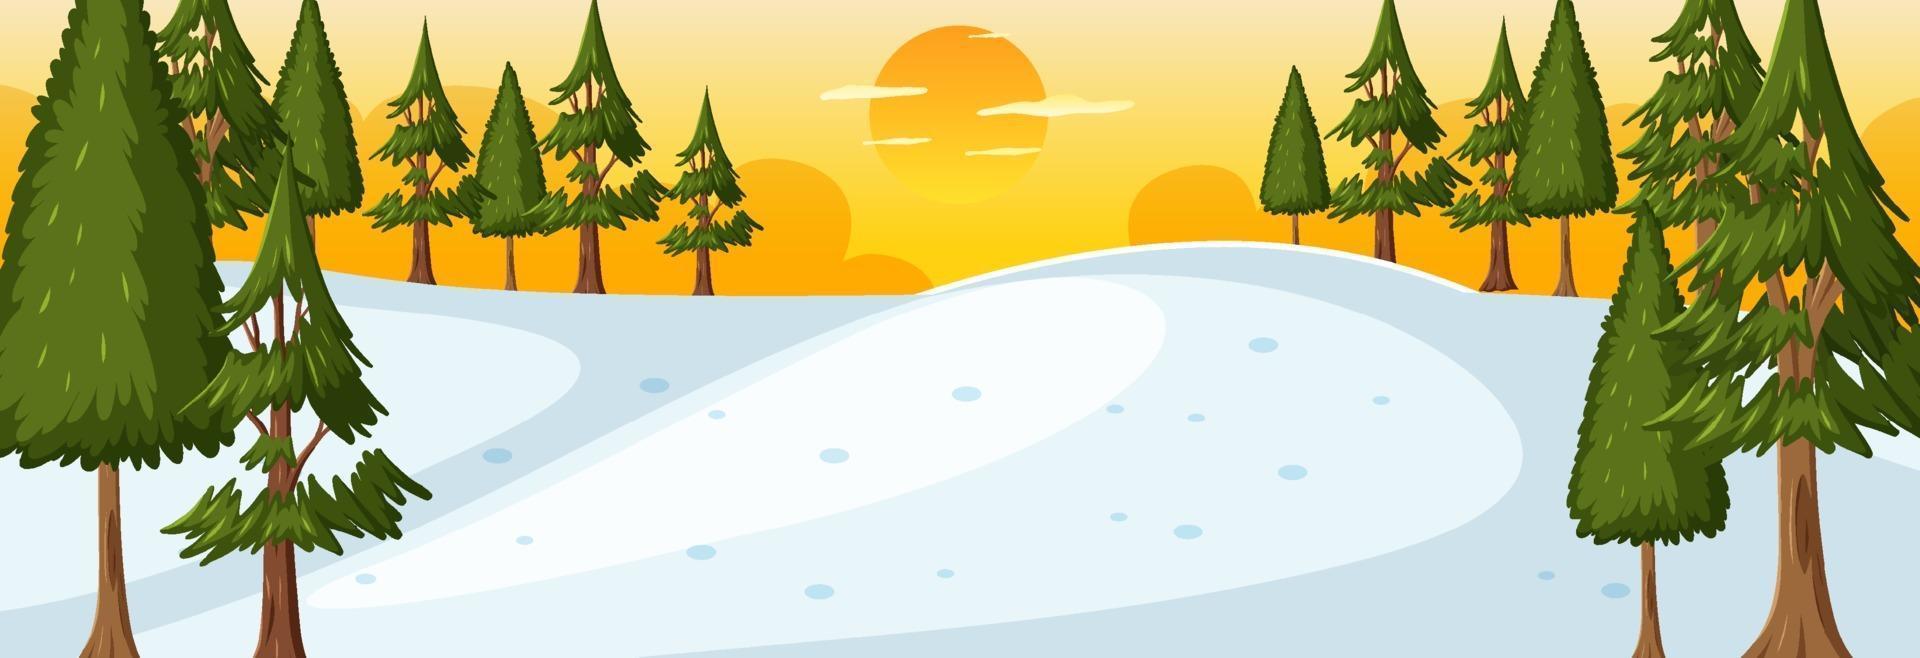 Winter season with nature park at sunset time horizontal scene vector